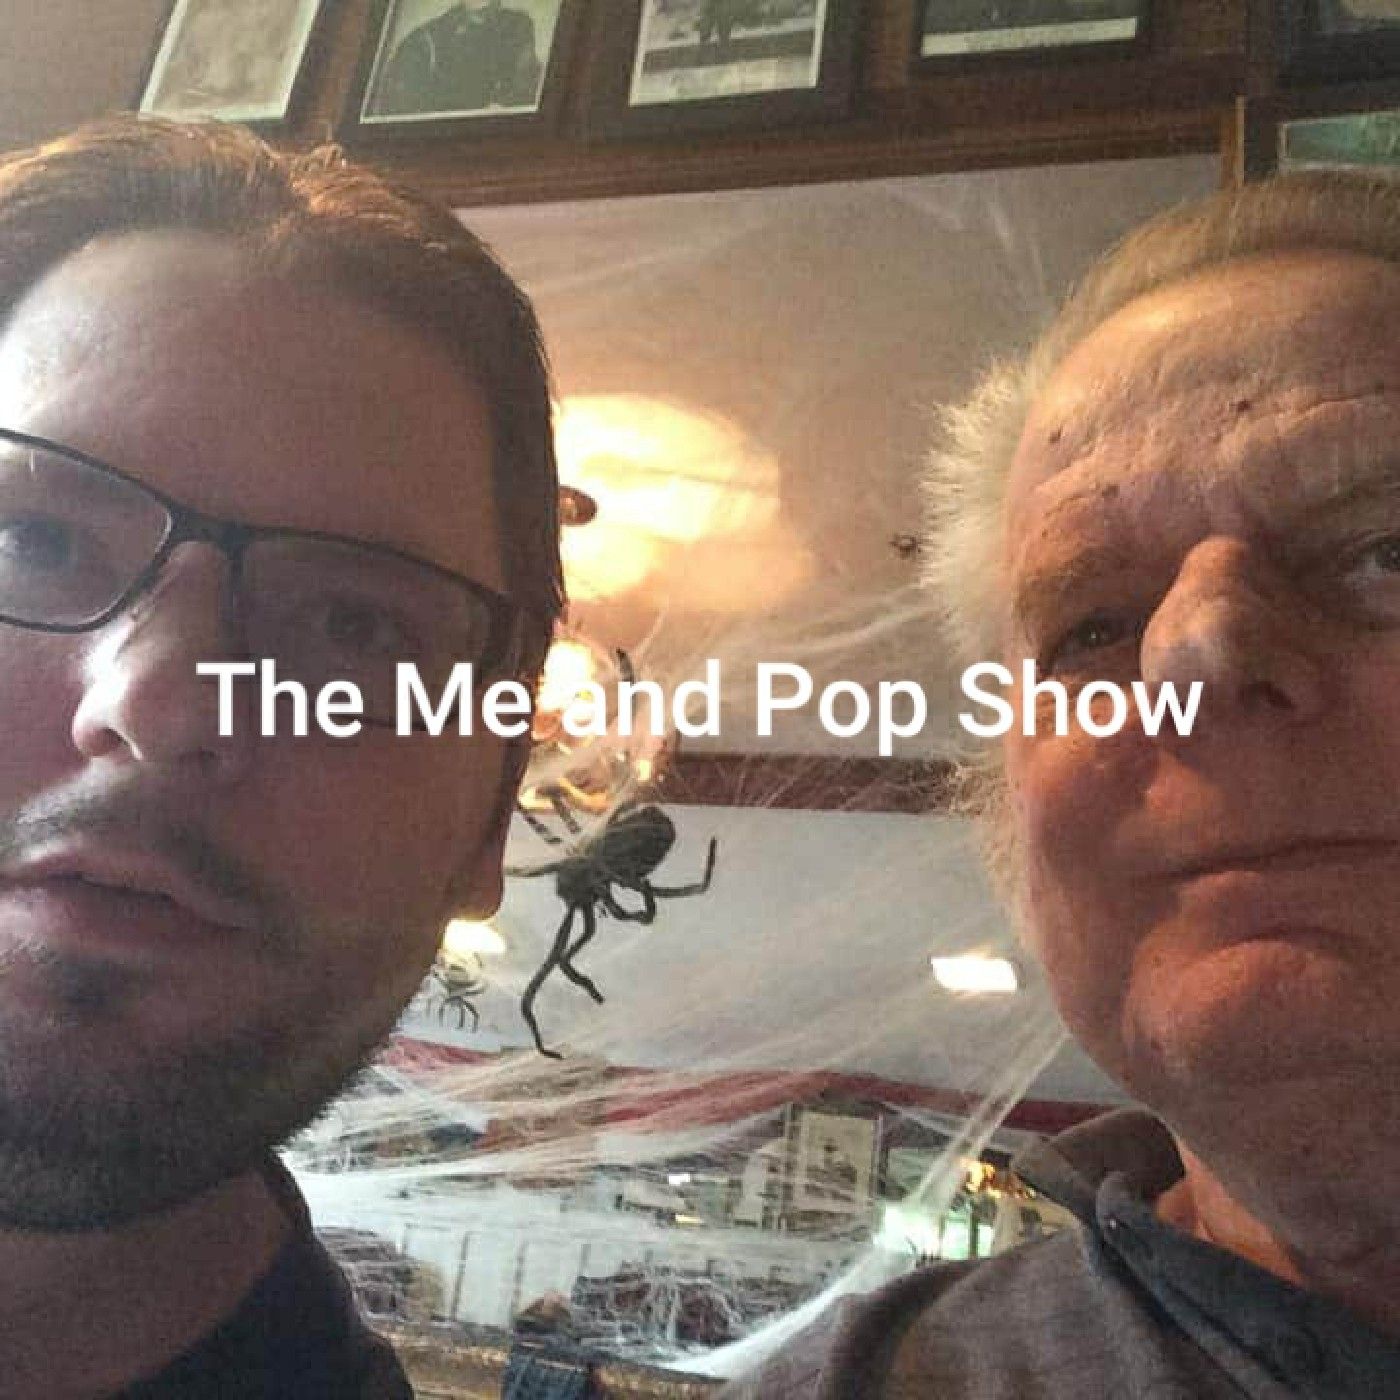 The Me and Pop Show Episode 2